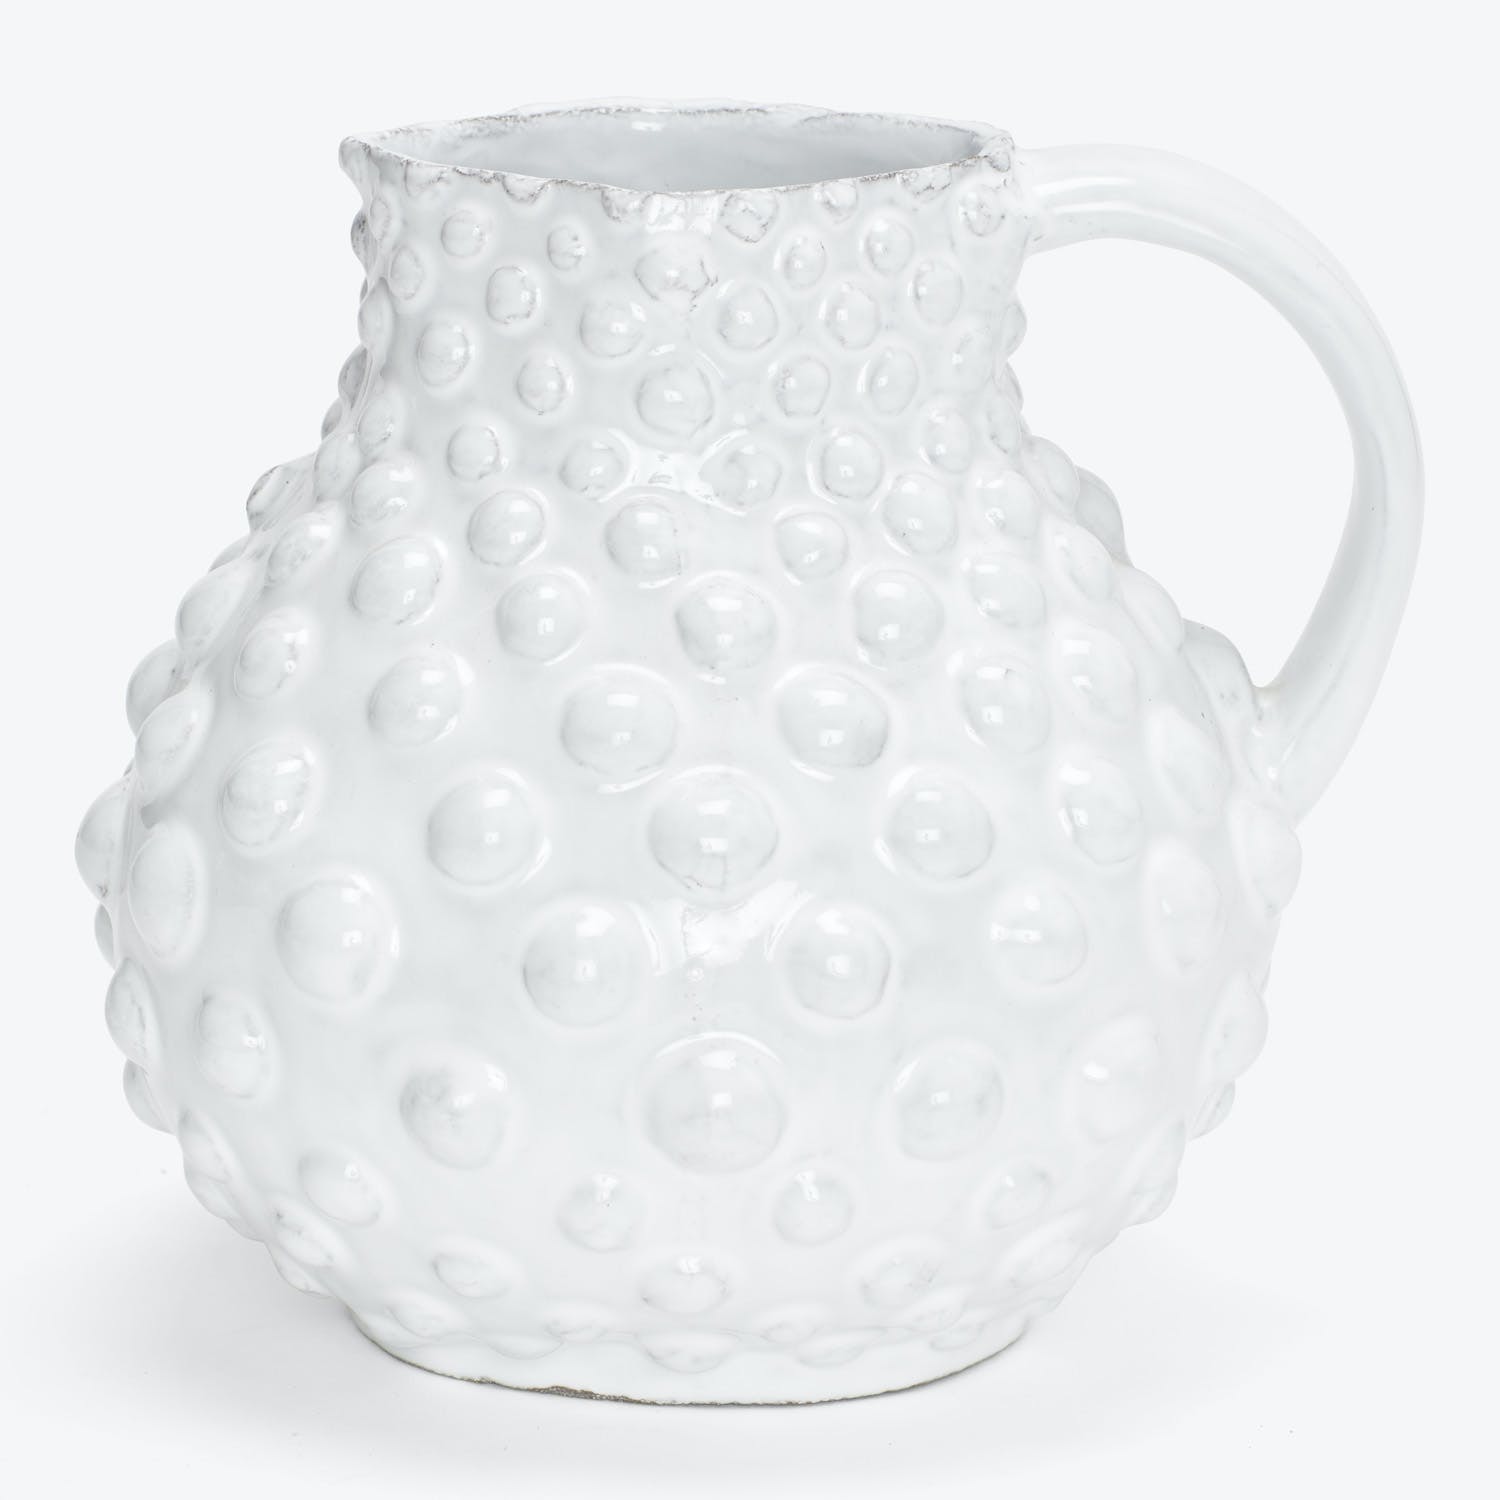 White ceramic pitcher with raised spherical bumps and textured surface